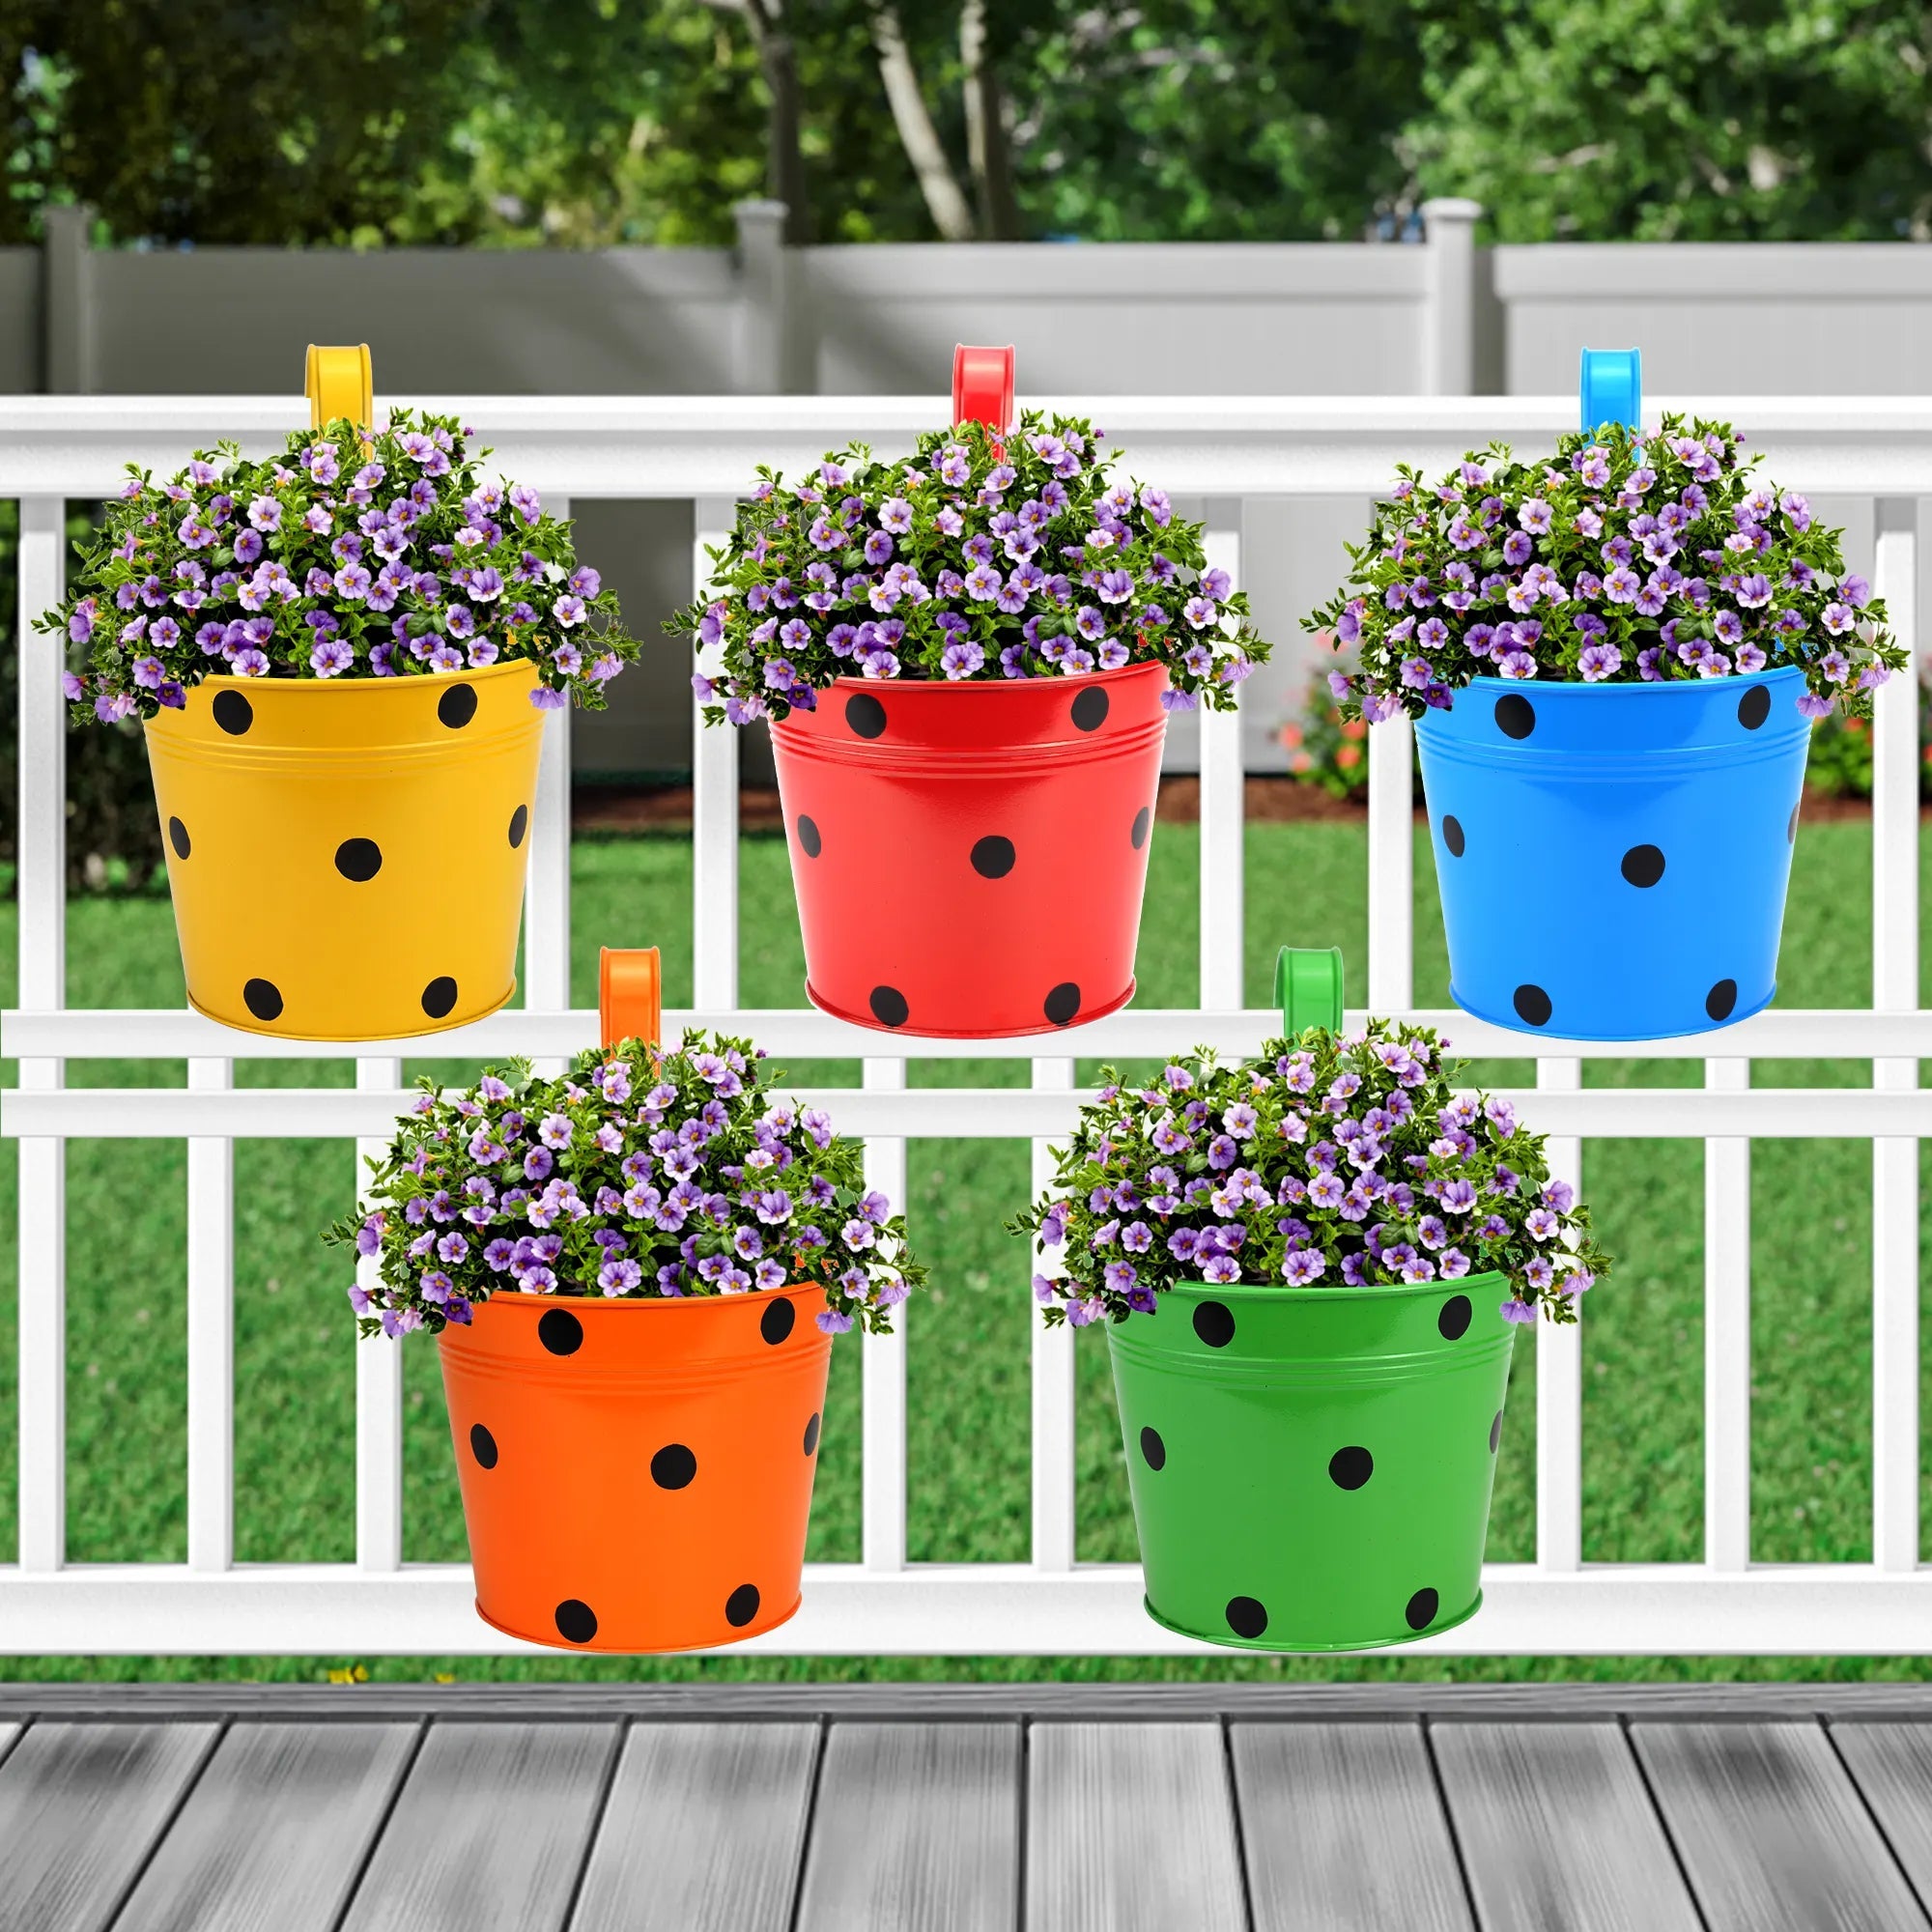 Round Shape Railing, Balcony Hanging Dotted Metal Planters (Multicolored) (Set of 5) Hanging Decor Urban Plant 